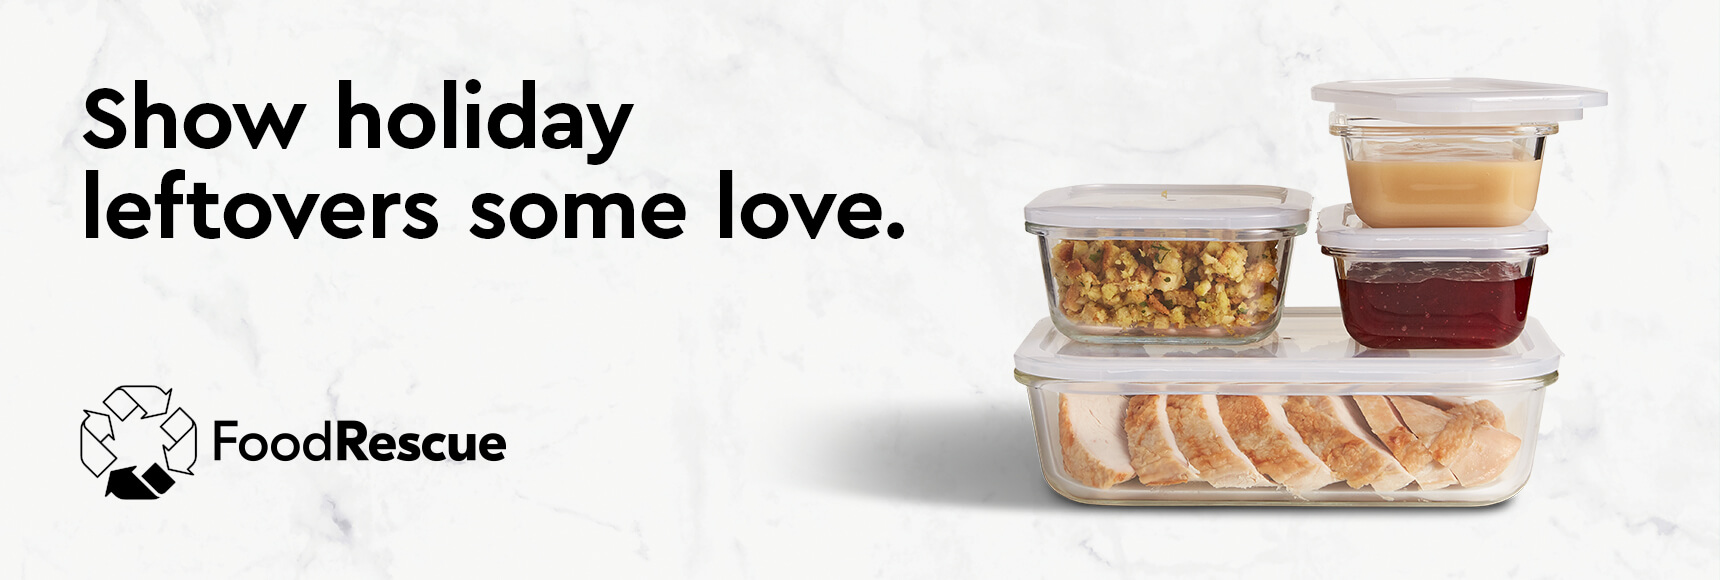 Show holiday leftovers some love.